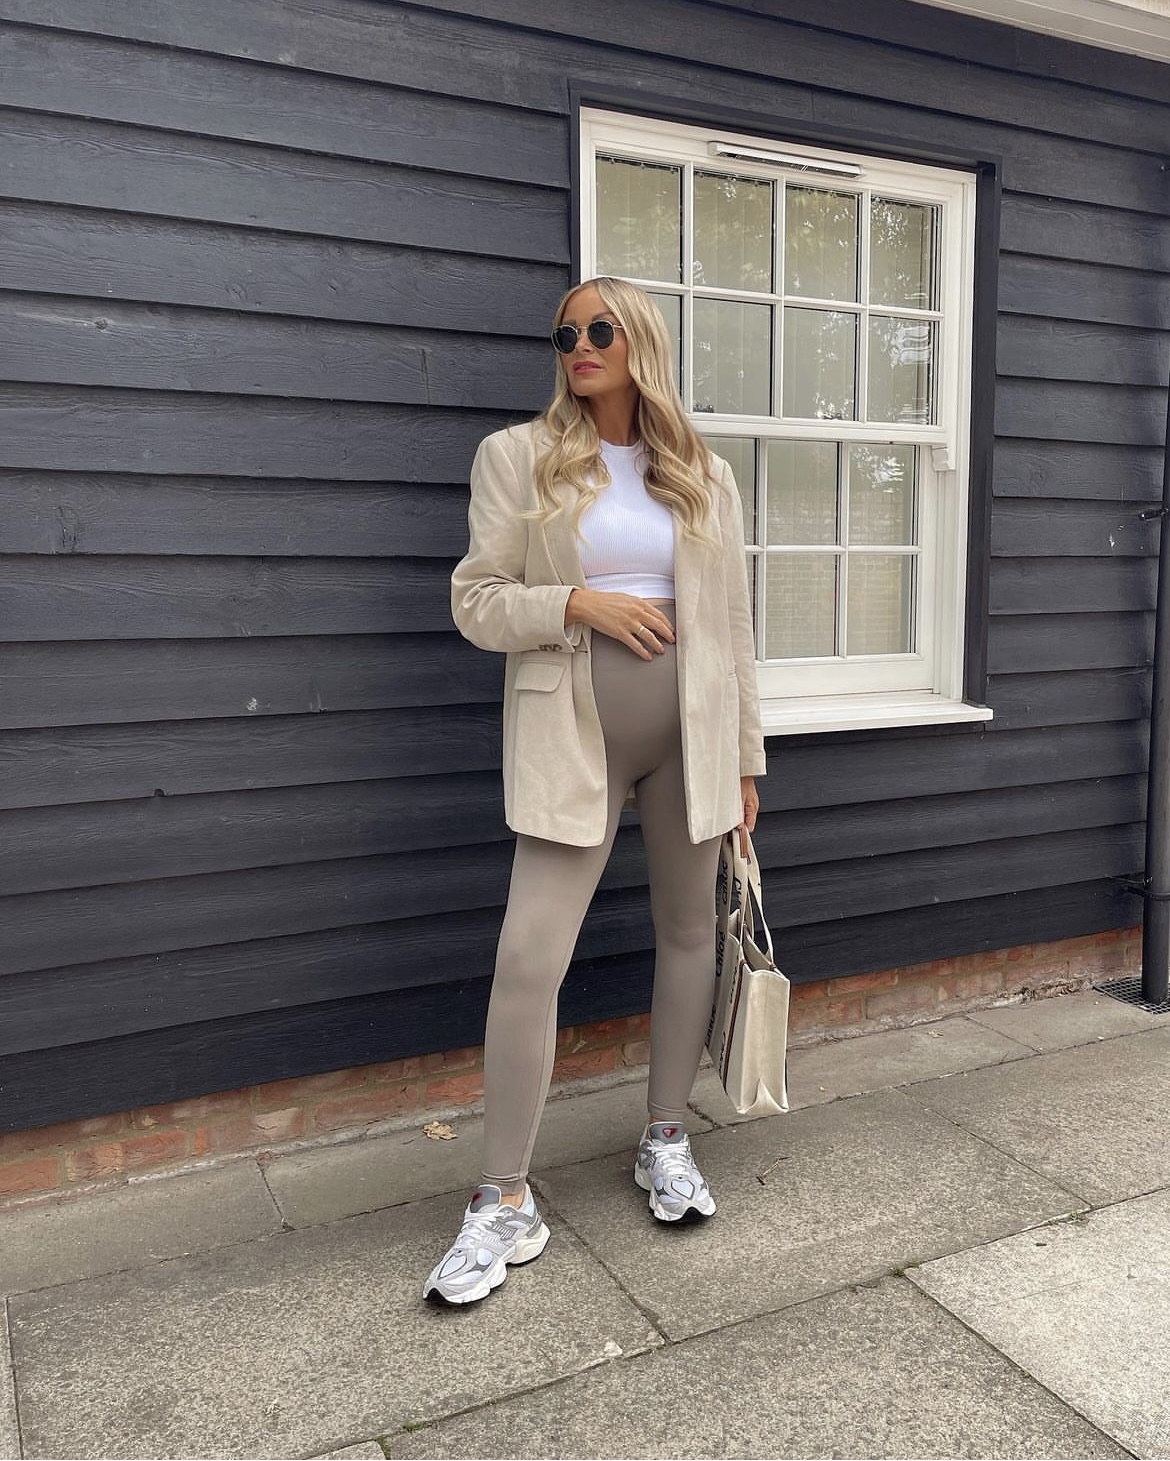 Pregnancy Style Ideas- How to Look Stylish and Comfortable During